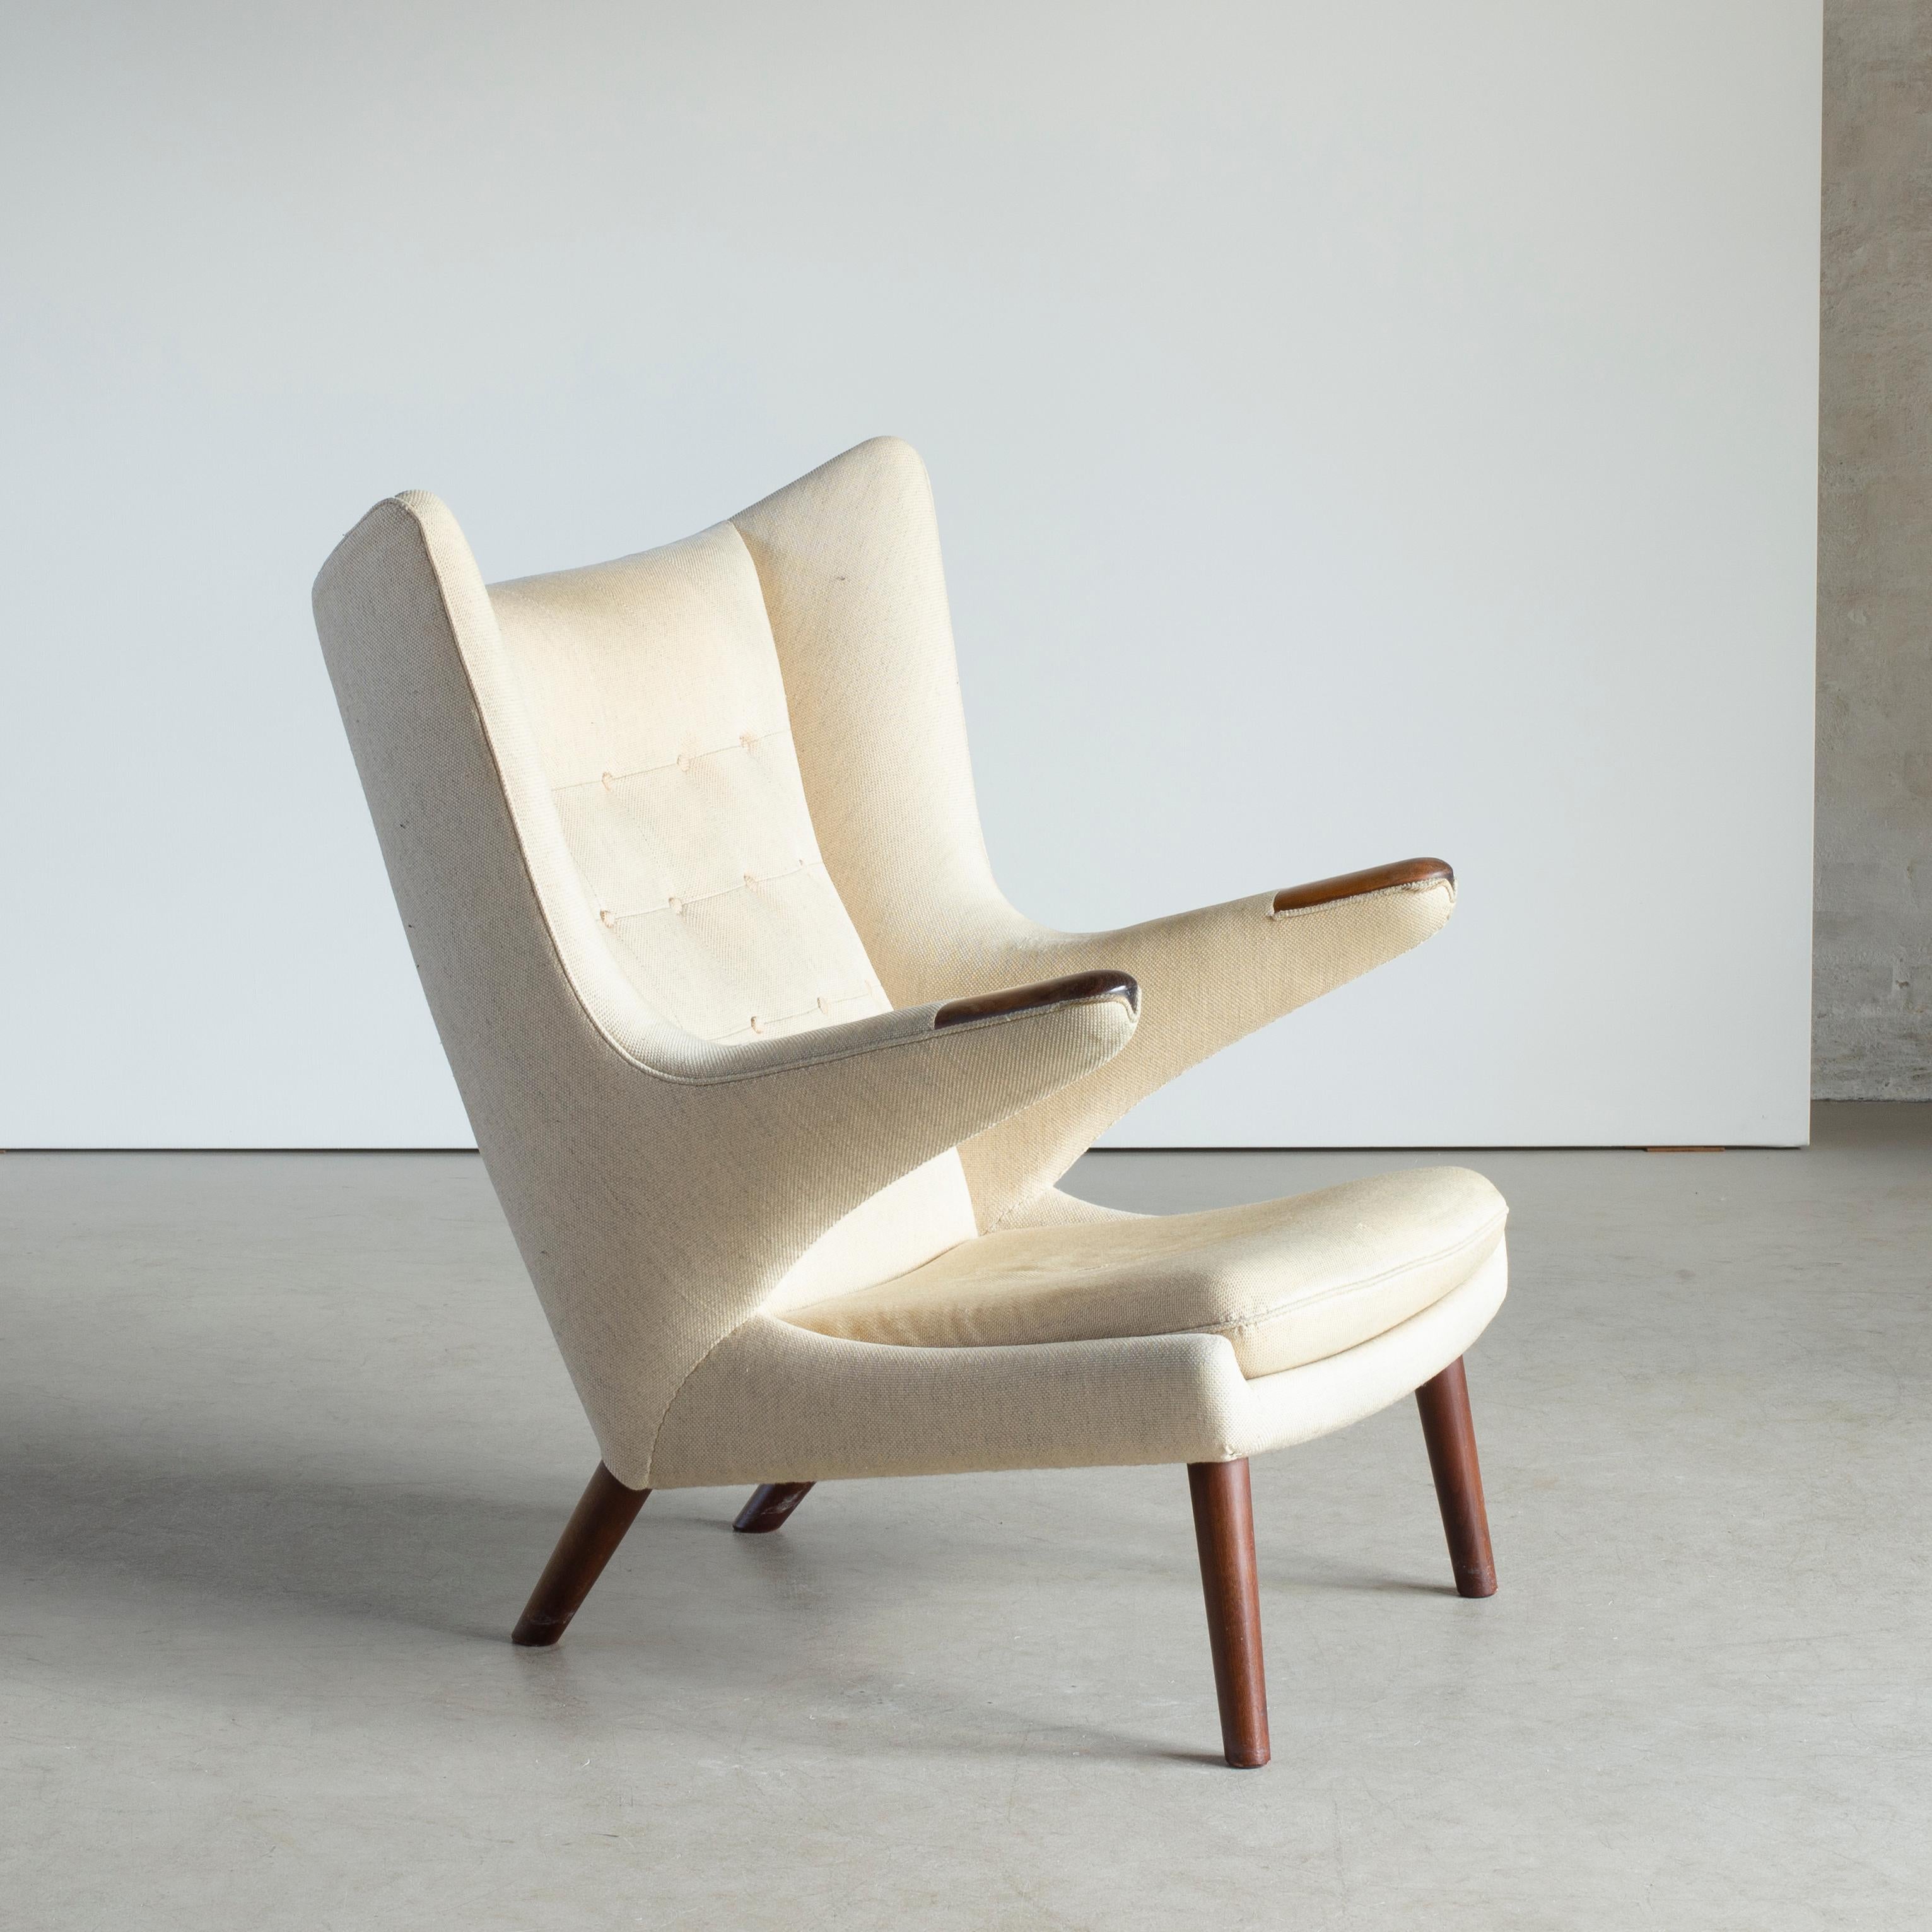 Hans J. Wegner Papa Bear chair with rosewood nails and beech legs. Upholstered in light fabric. Executed by A.P. Stolen, Copenhagen, Denmark.